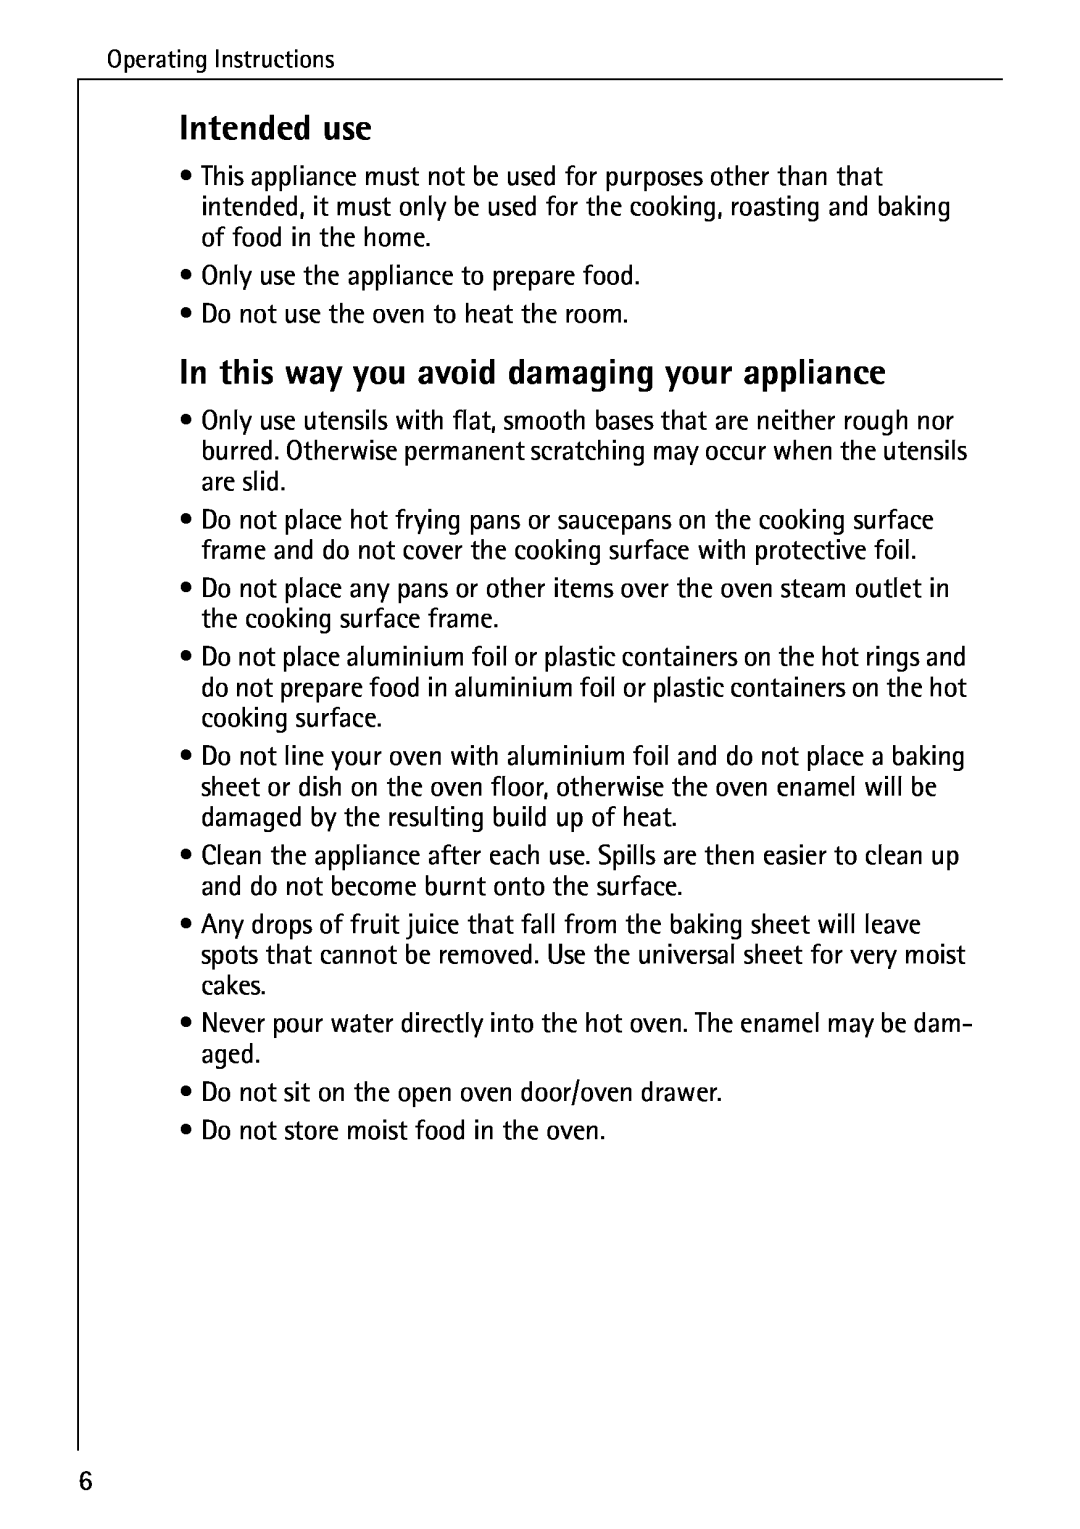 AEG 2003 F operating instructions Intended use, In this way you avoid damaging your appliance 